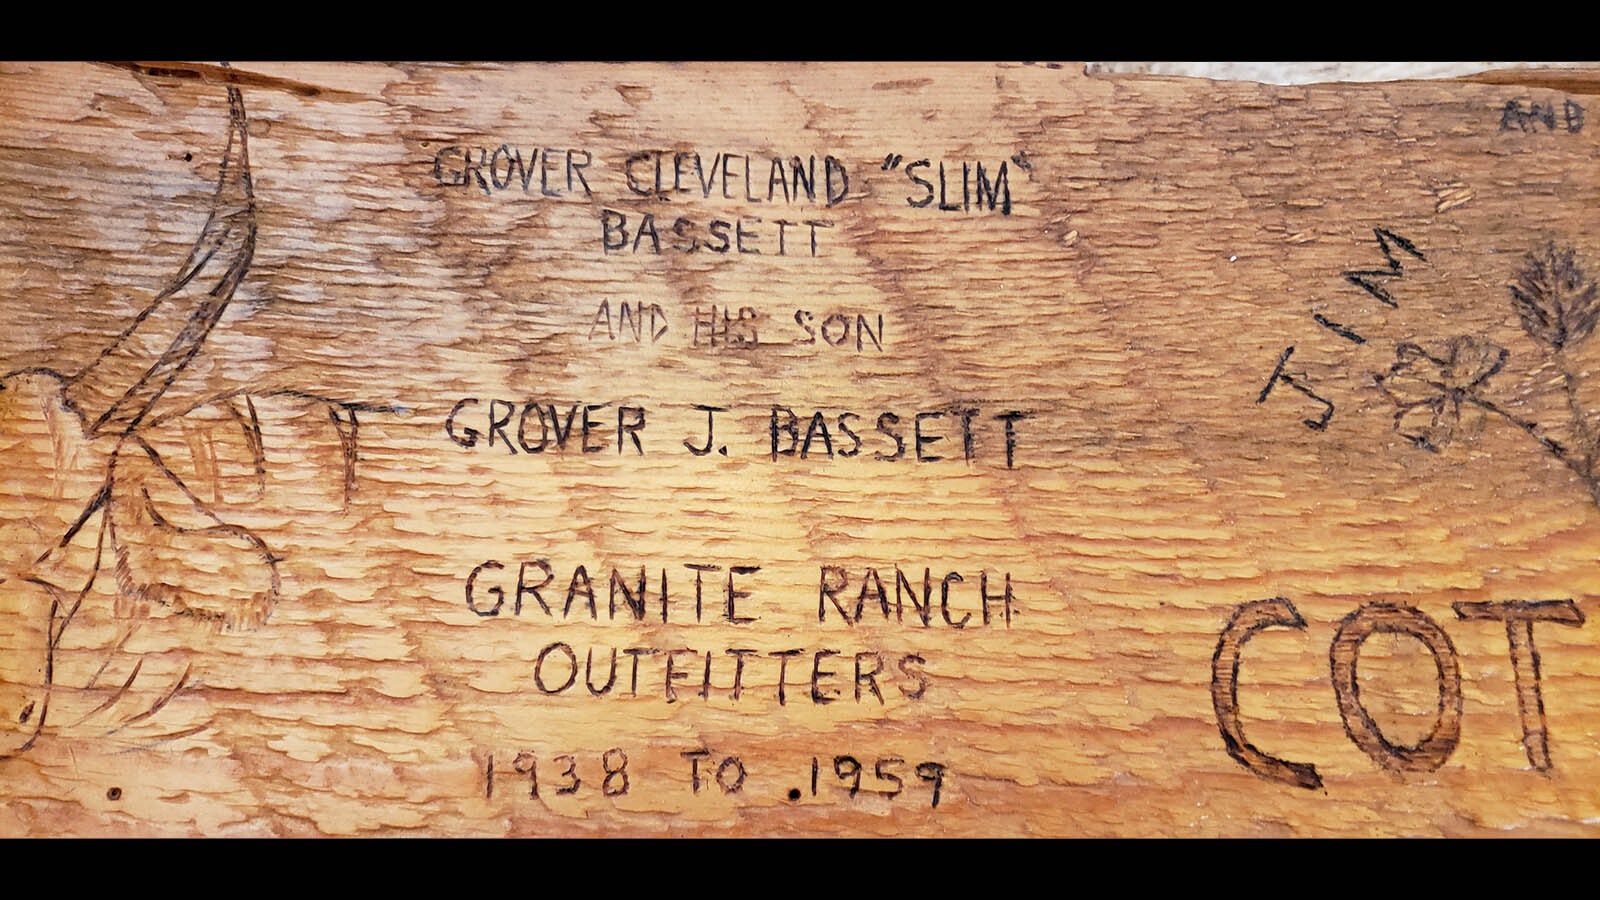 Slim Basset was an avid angler and once owned Granite Creek Ranch.